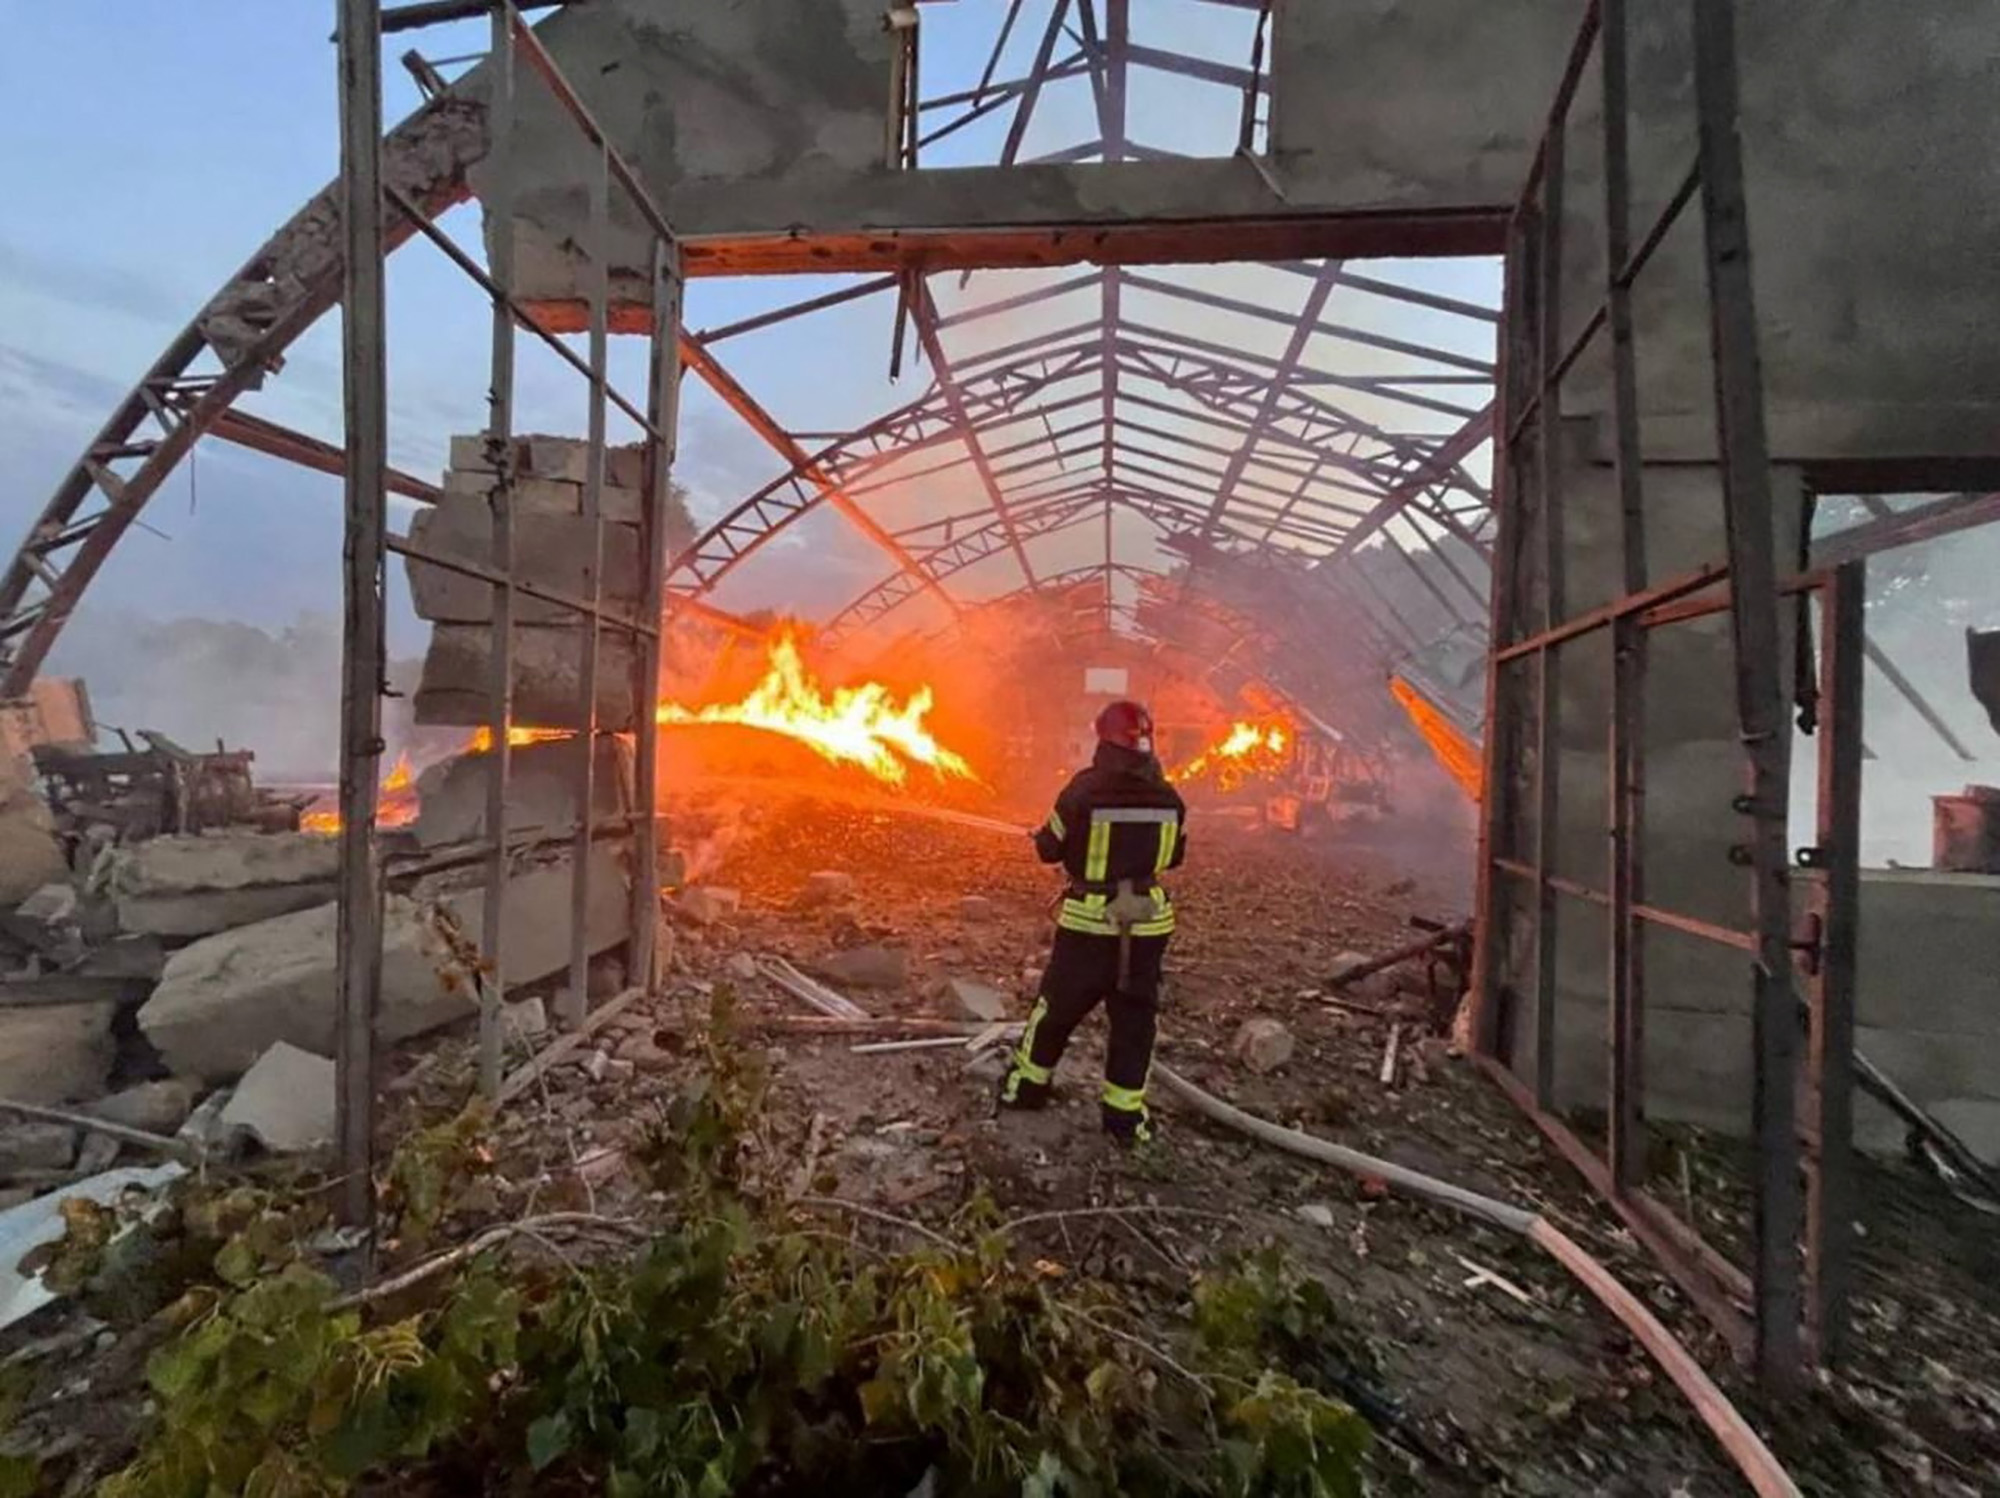 A firefighter works at a site that was hit amid Russian drone attacks in Odesa region, Ukraine, in this handout image released September 4.